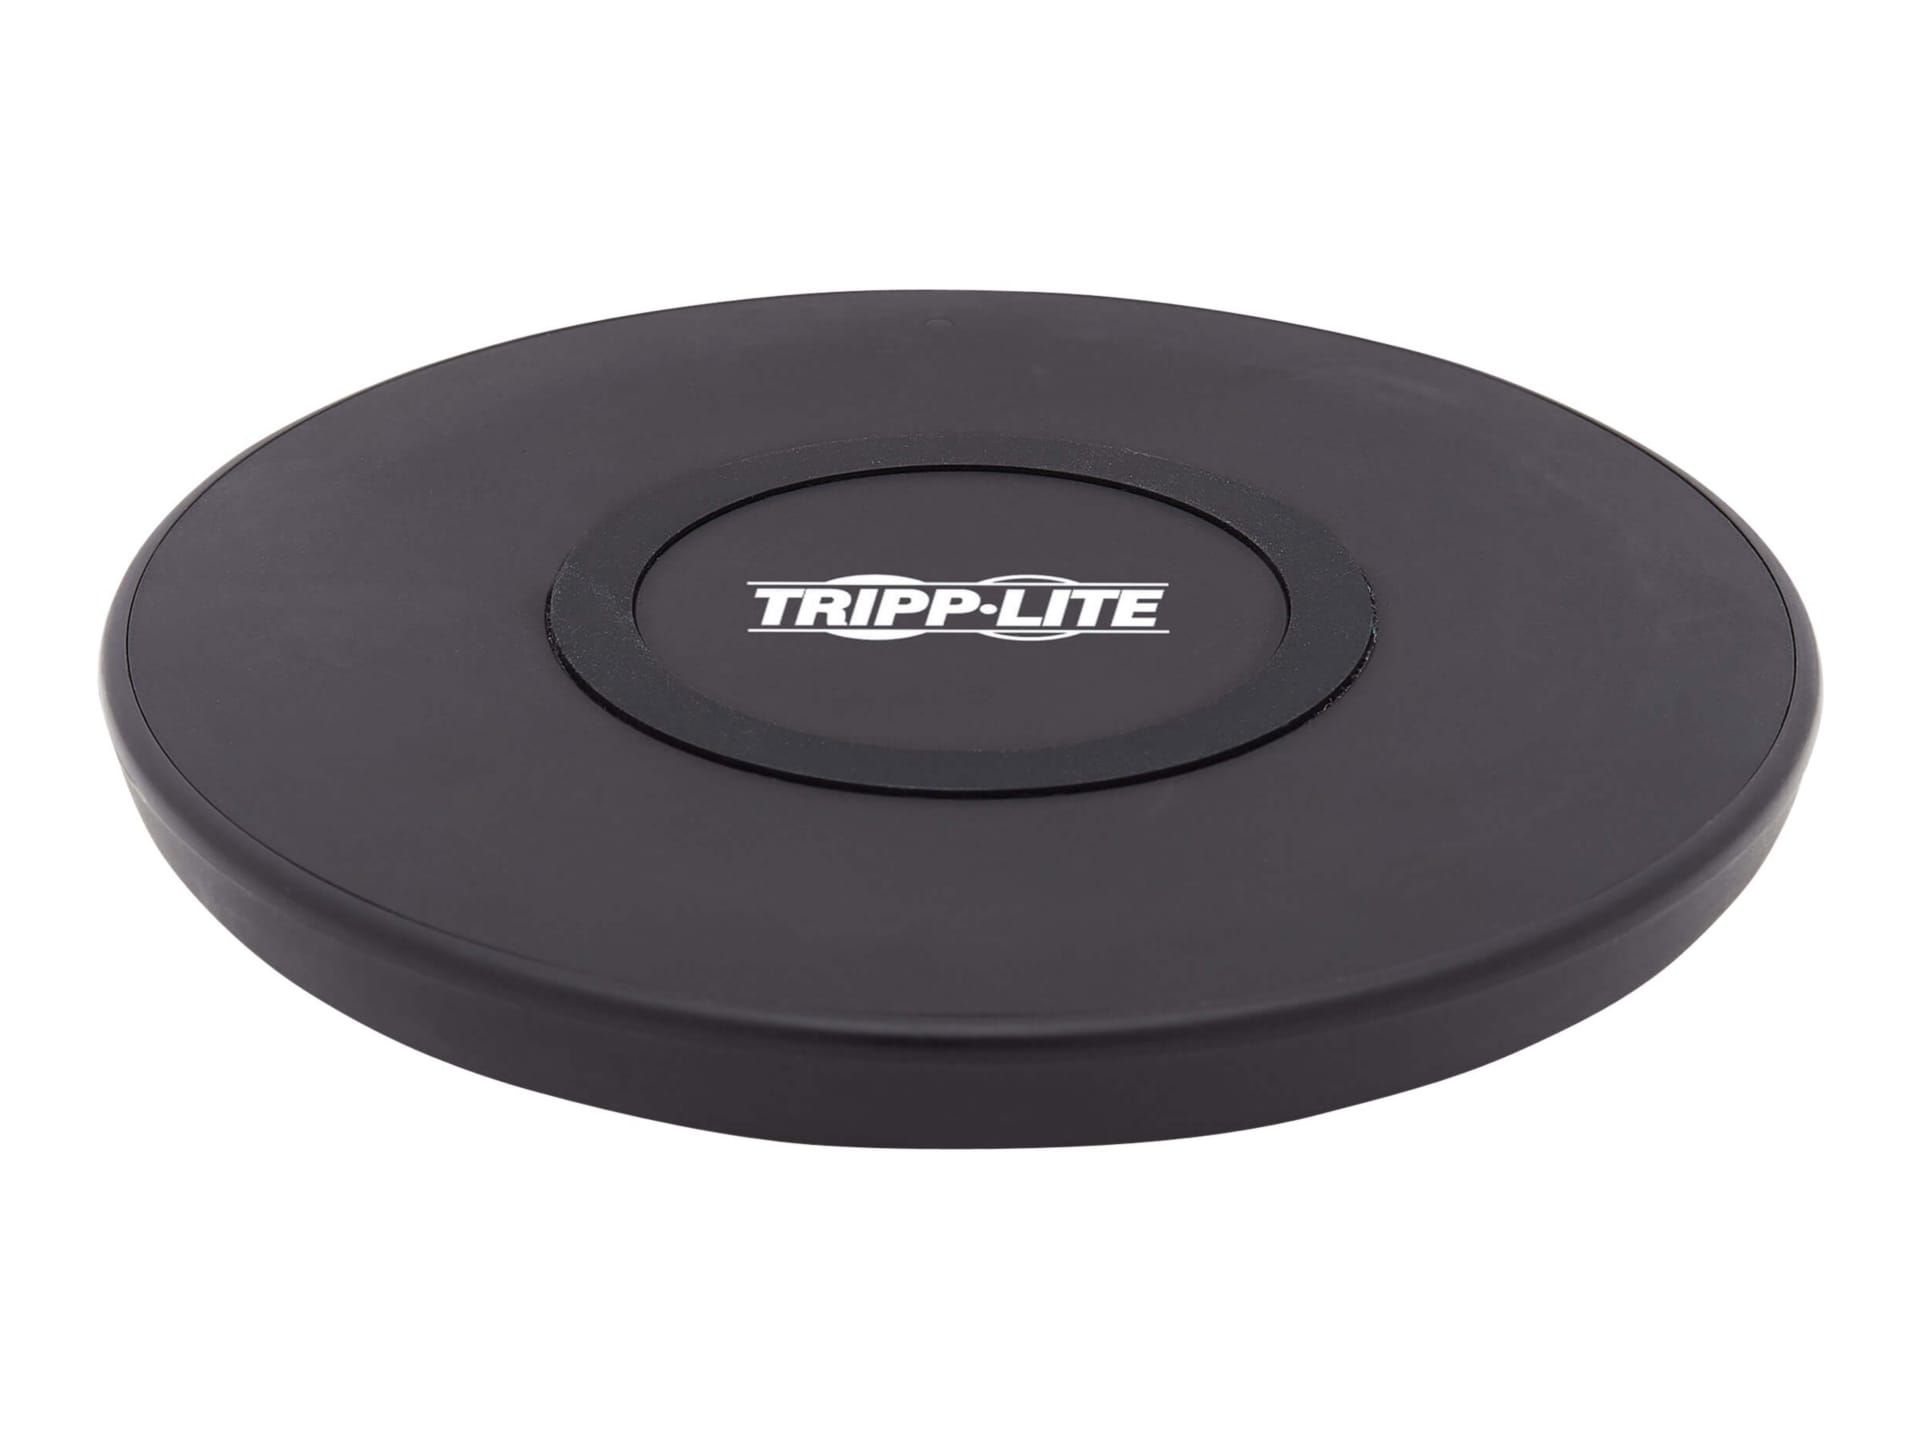 Tripp Lite Wireless Phone Charger - 10W, Qi Certified, Apple and Samsung Compatible, Black wireless charging pad - 10